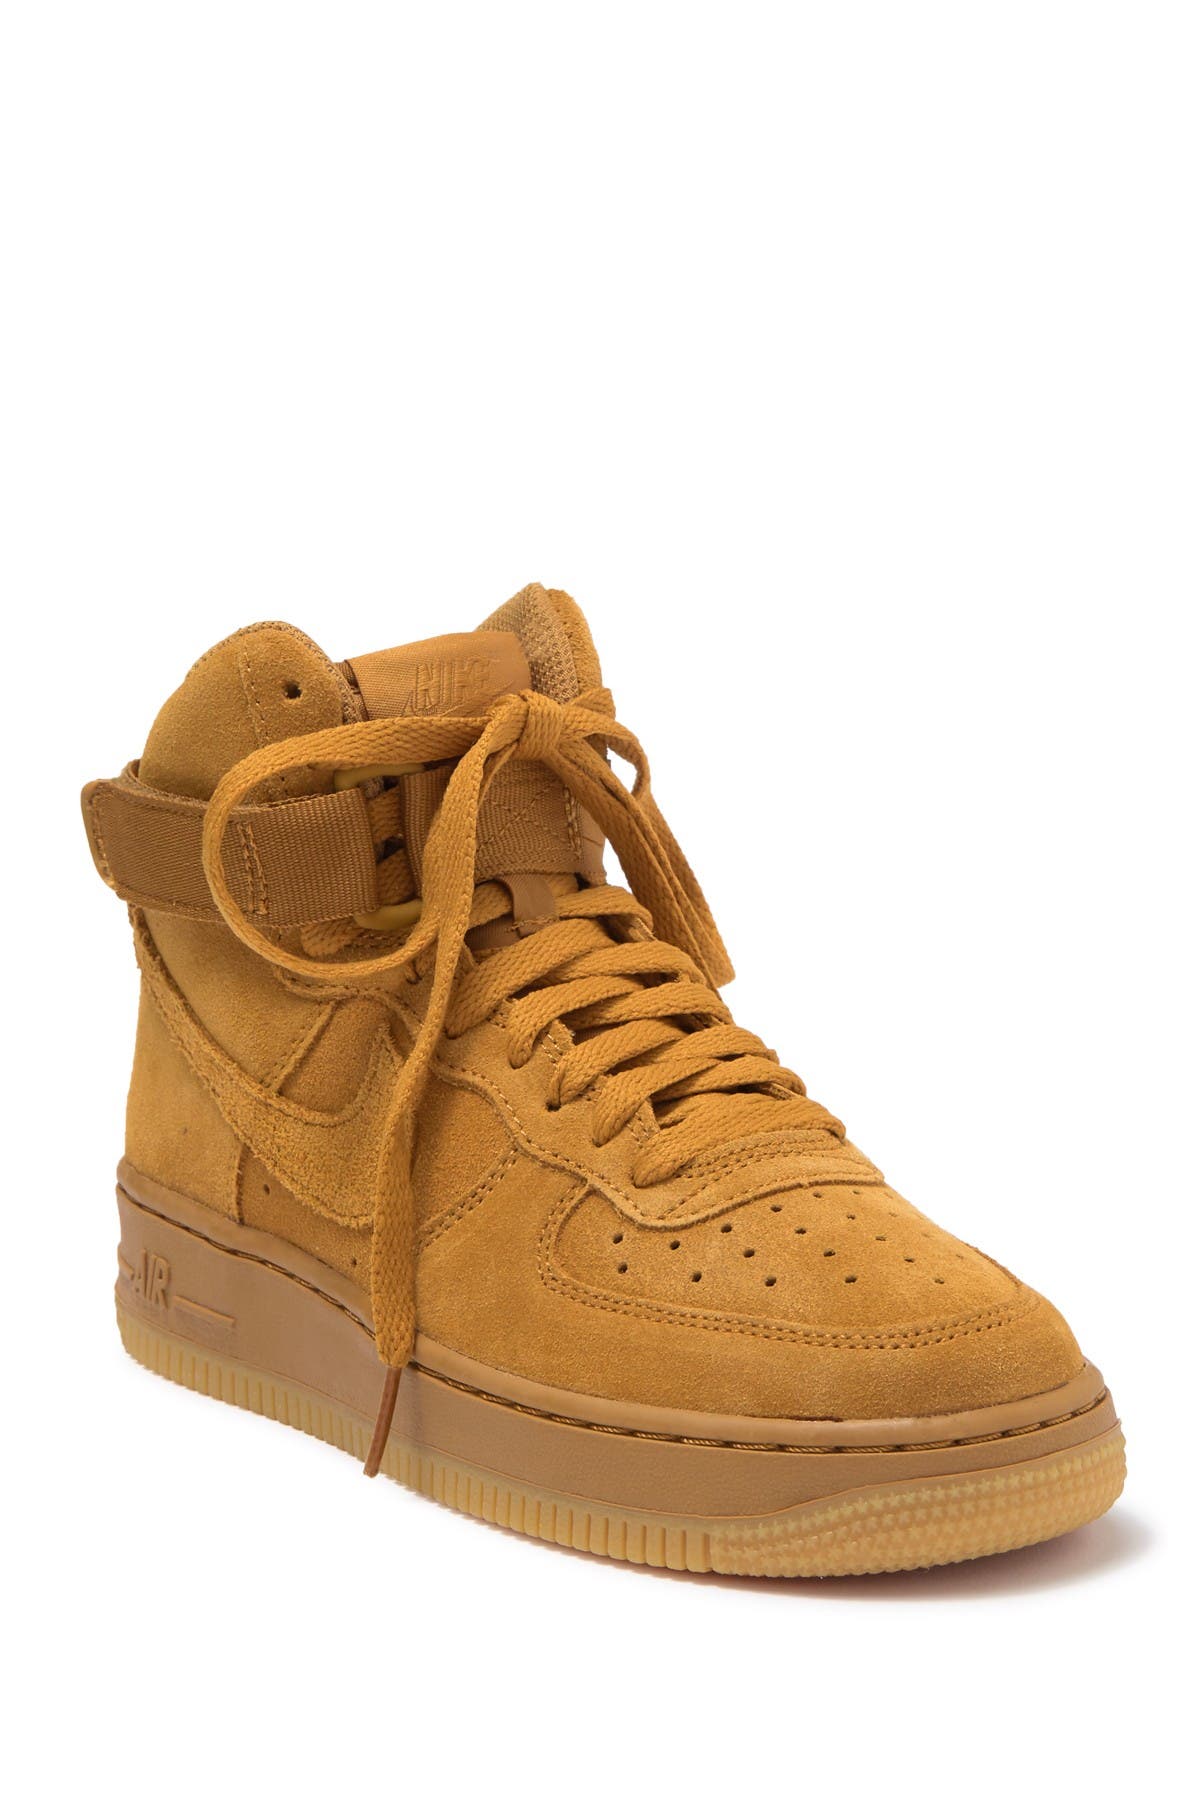 Nike | Air Force 1 Suede High Top 